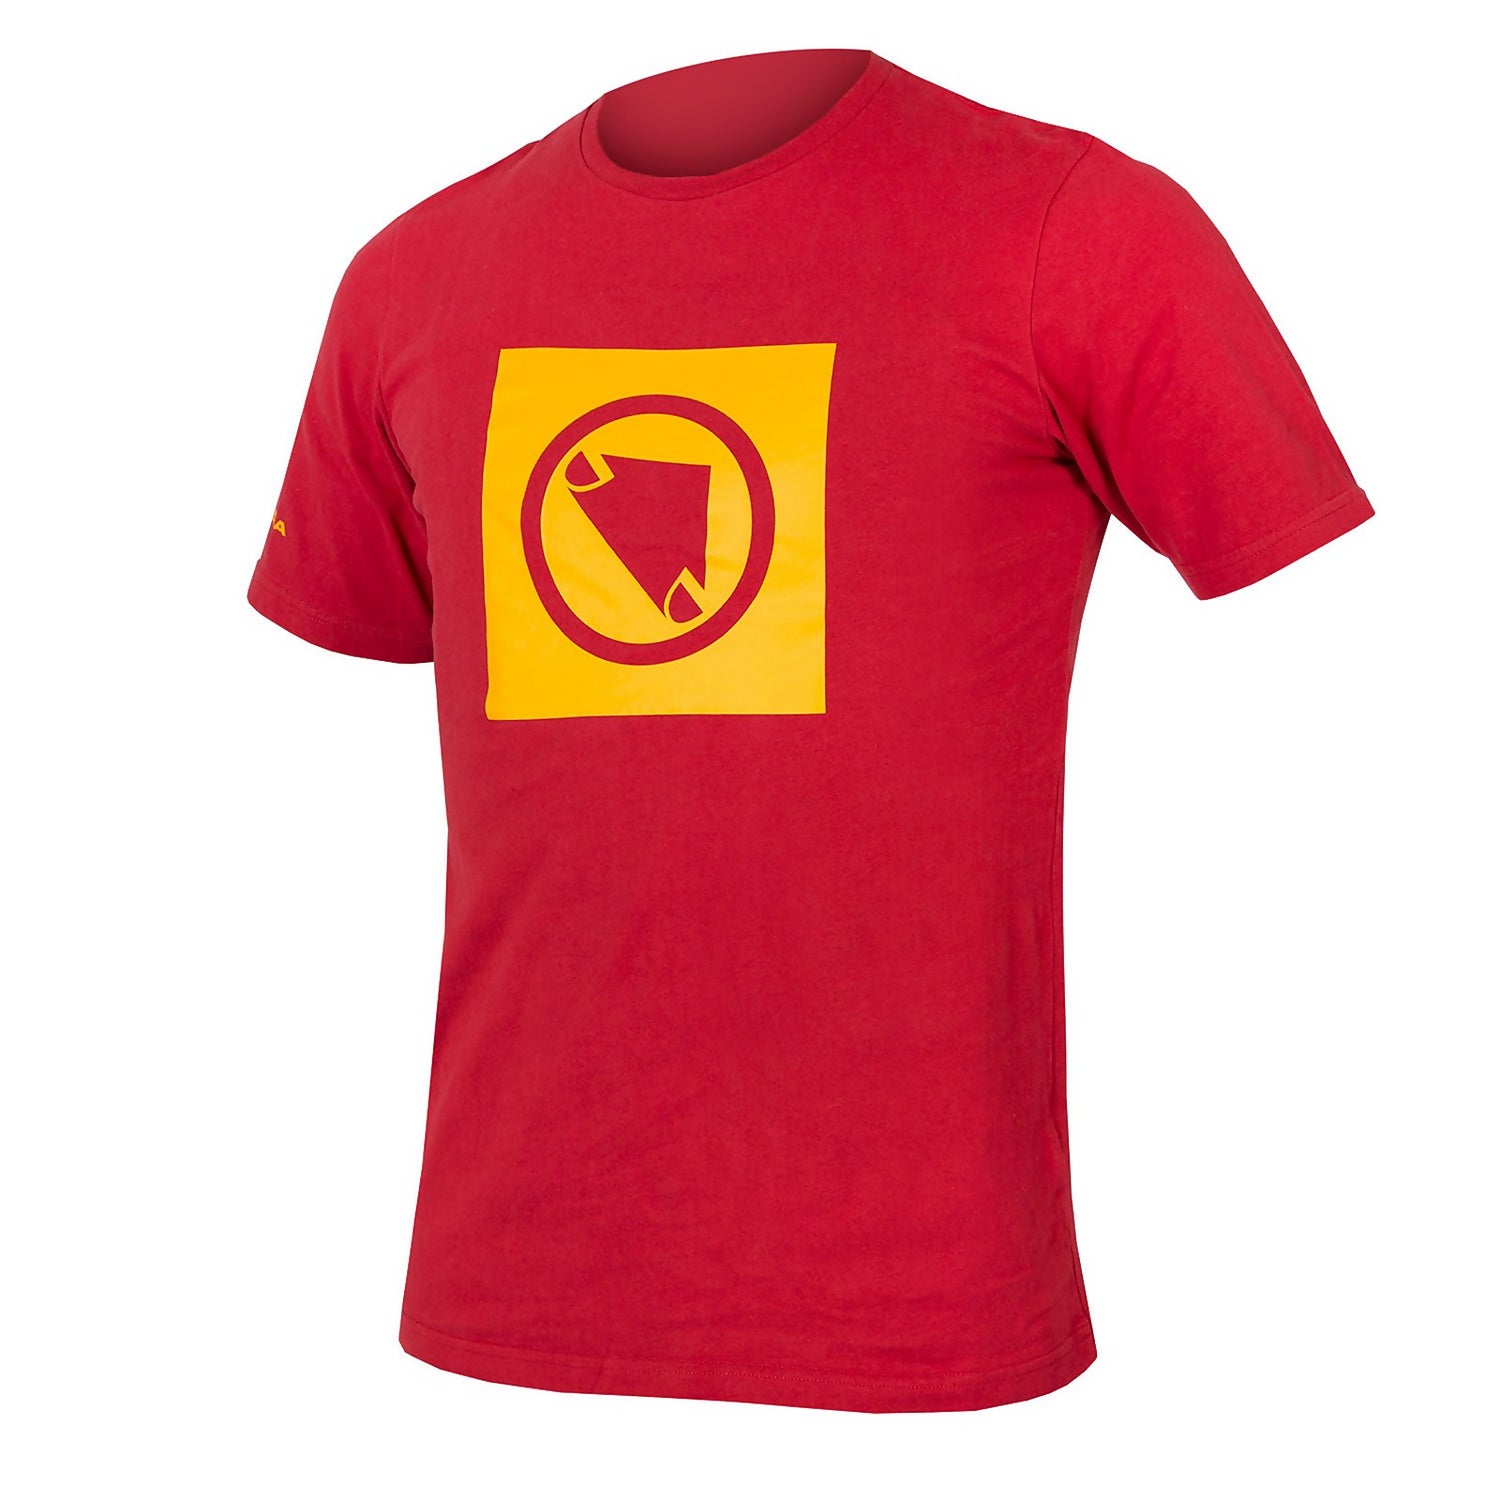 Men's One Clan Carbon Icon T - Red - XL